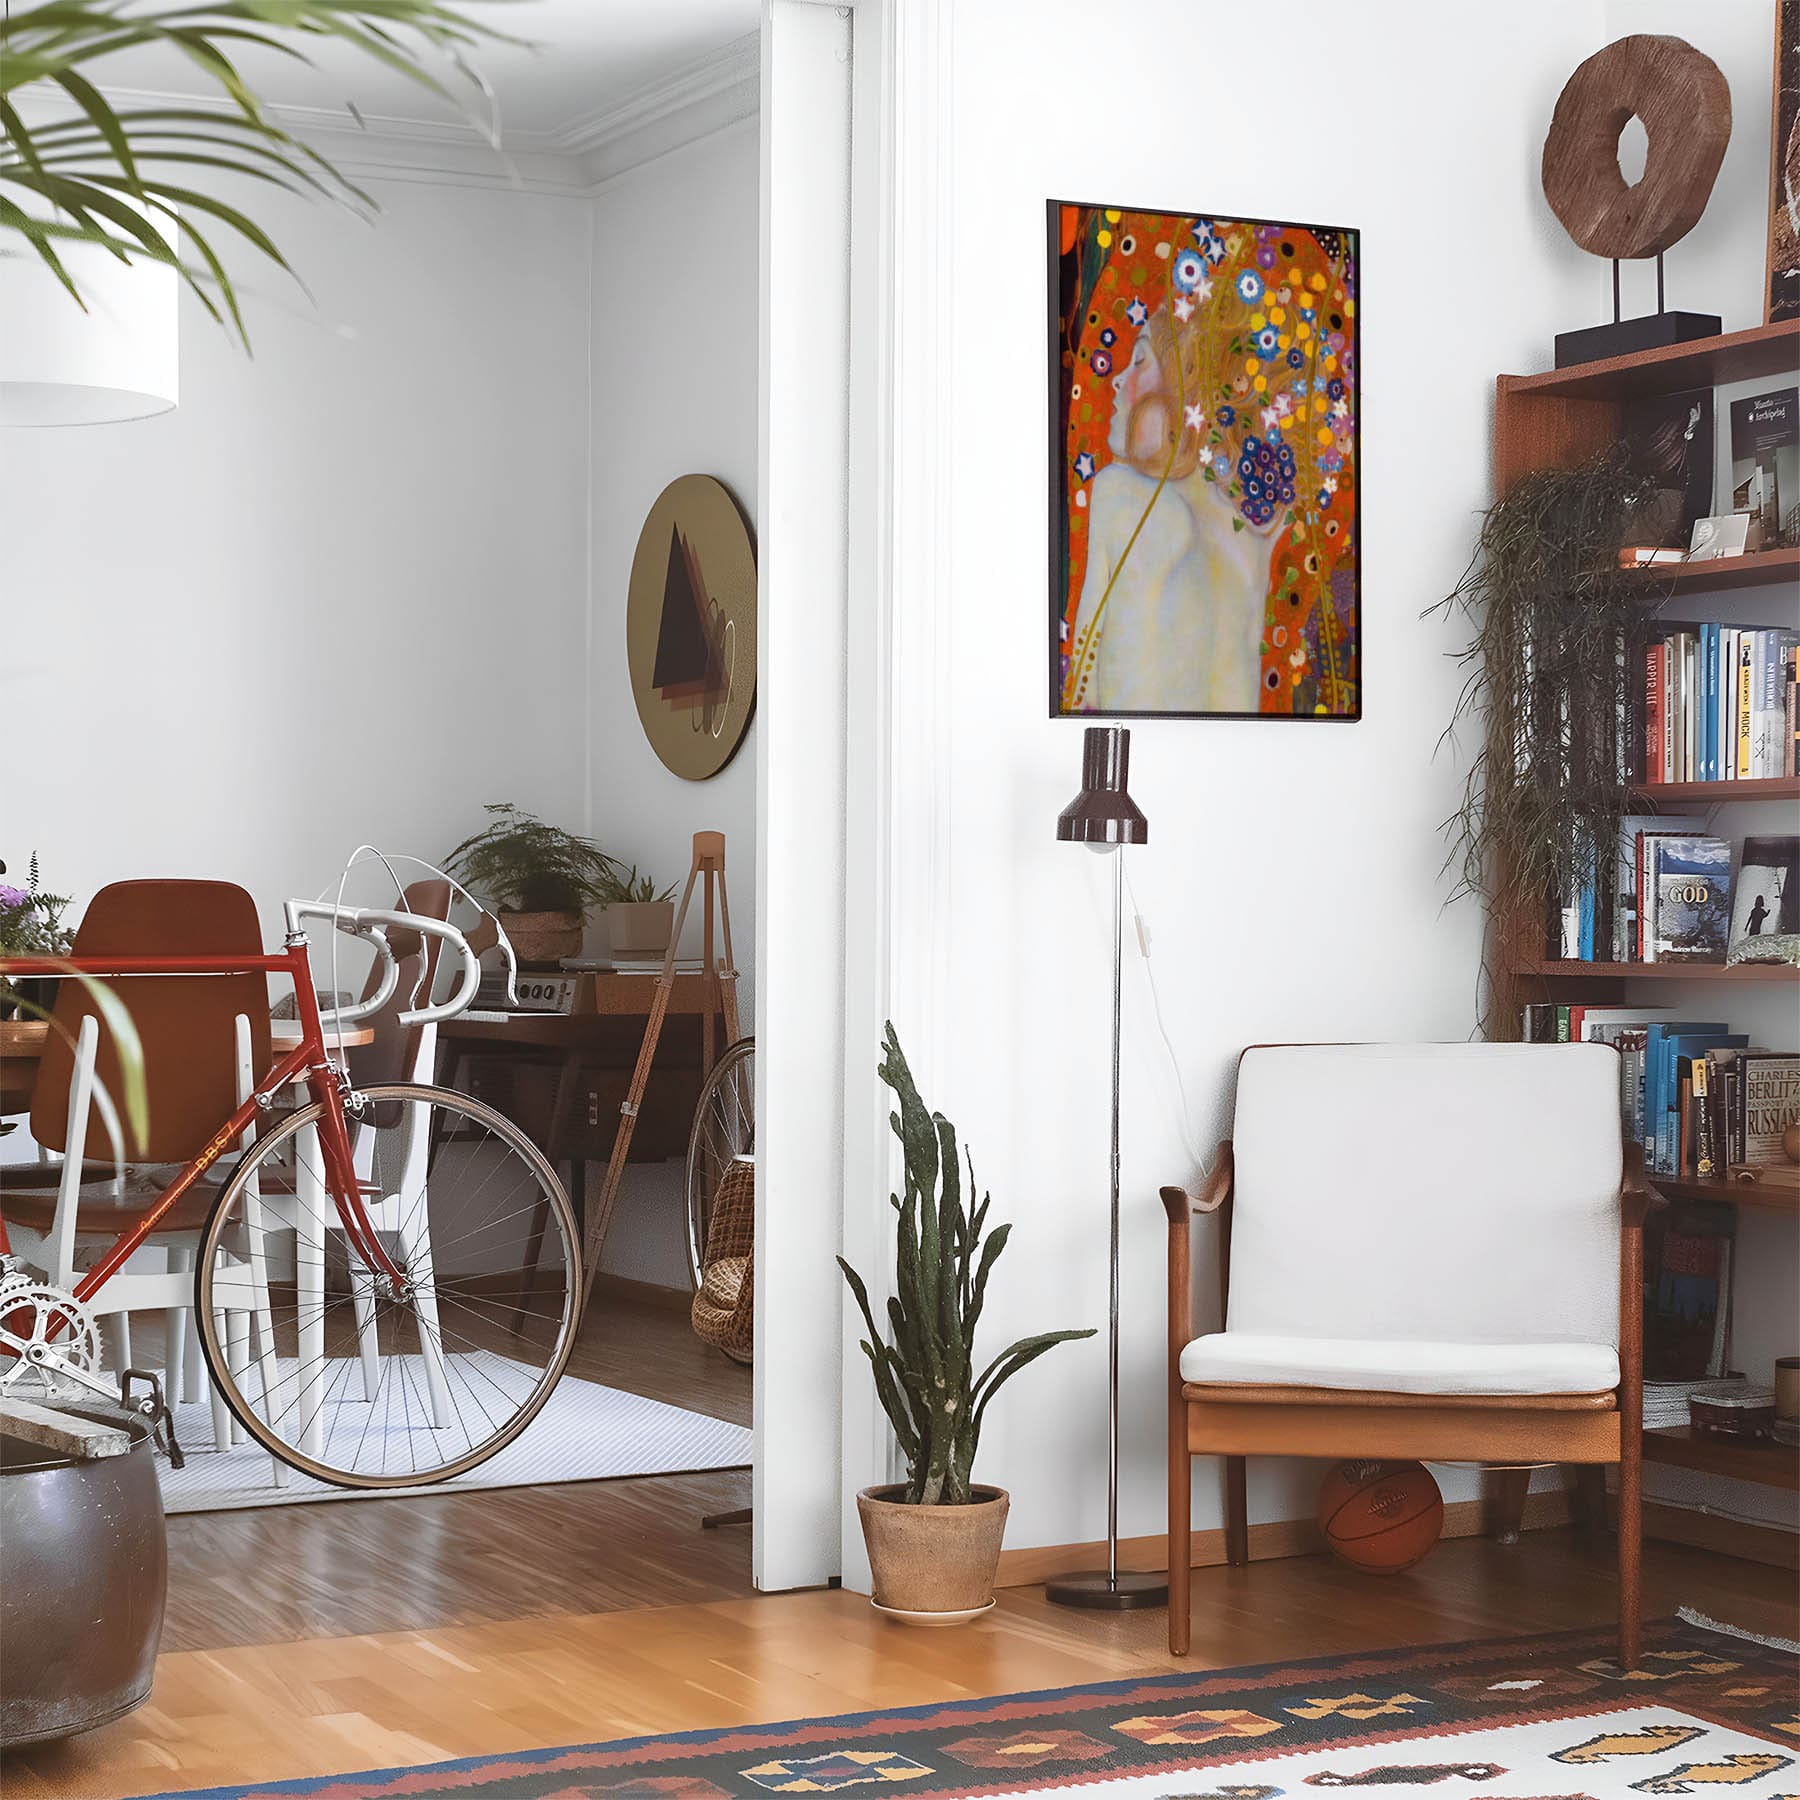 Eclectic living room with a road bike, bookshelf and house plants that features framed artwork of a Boho Aesthetic above a chair and lamp